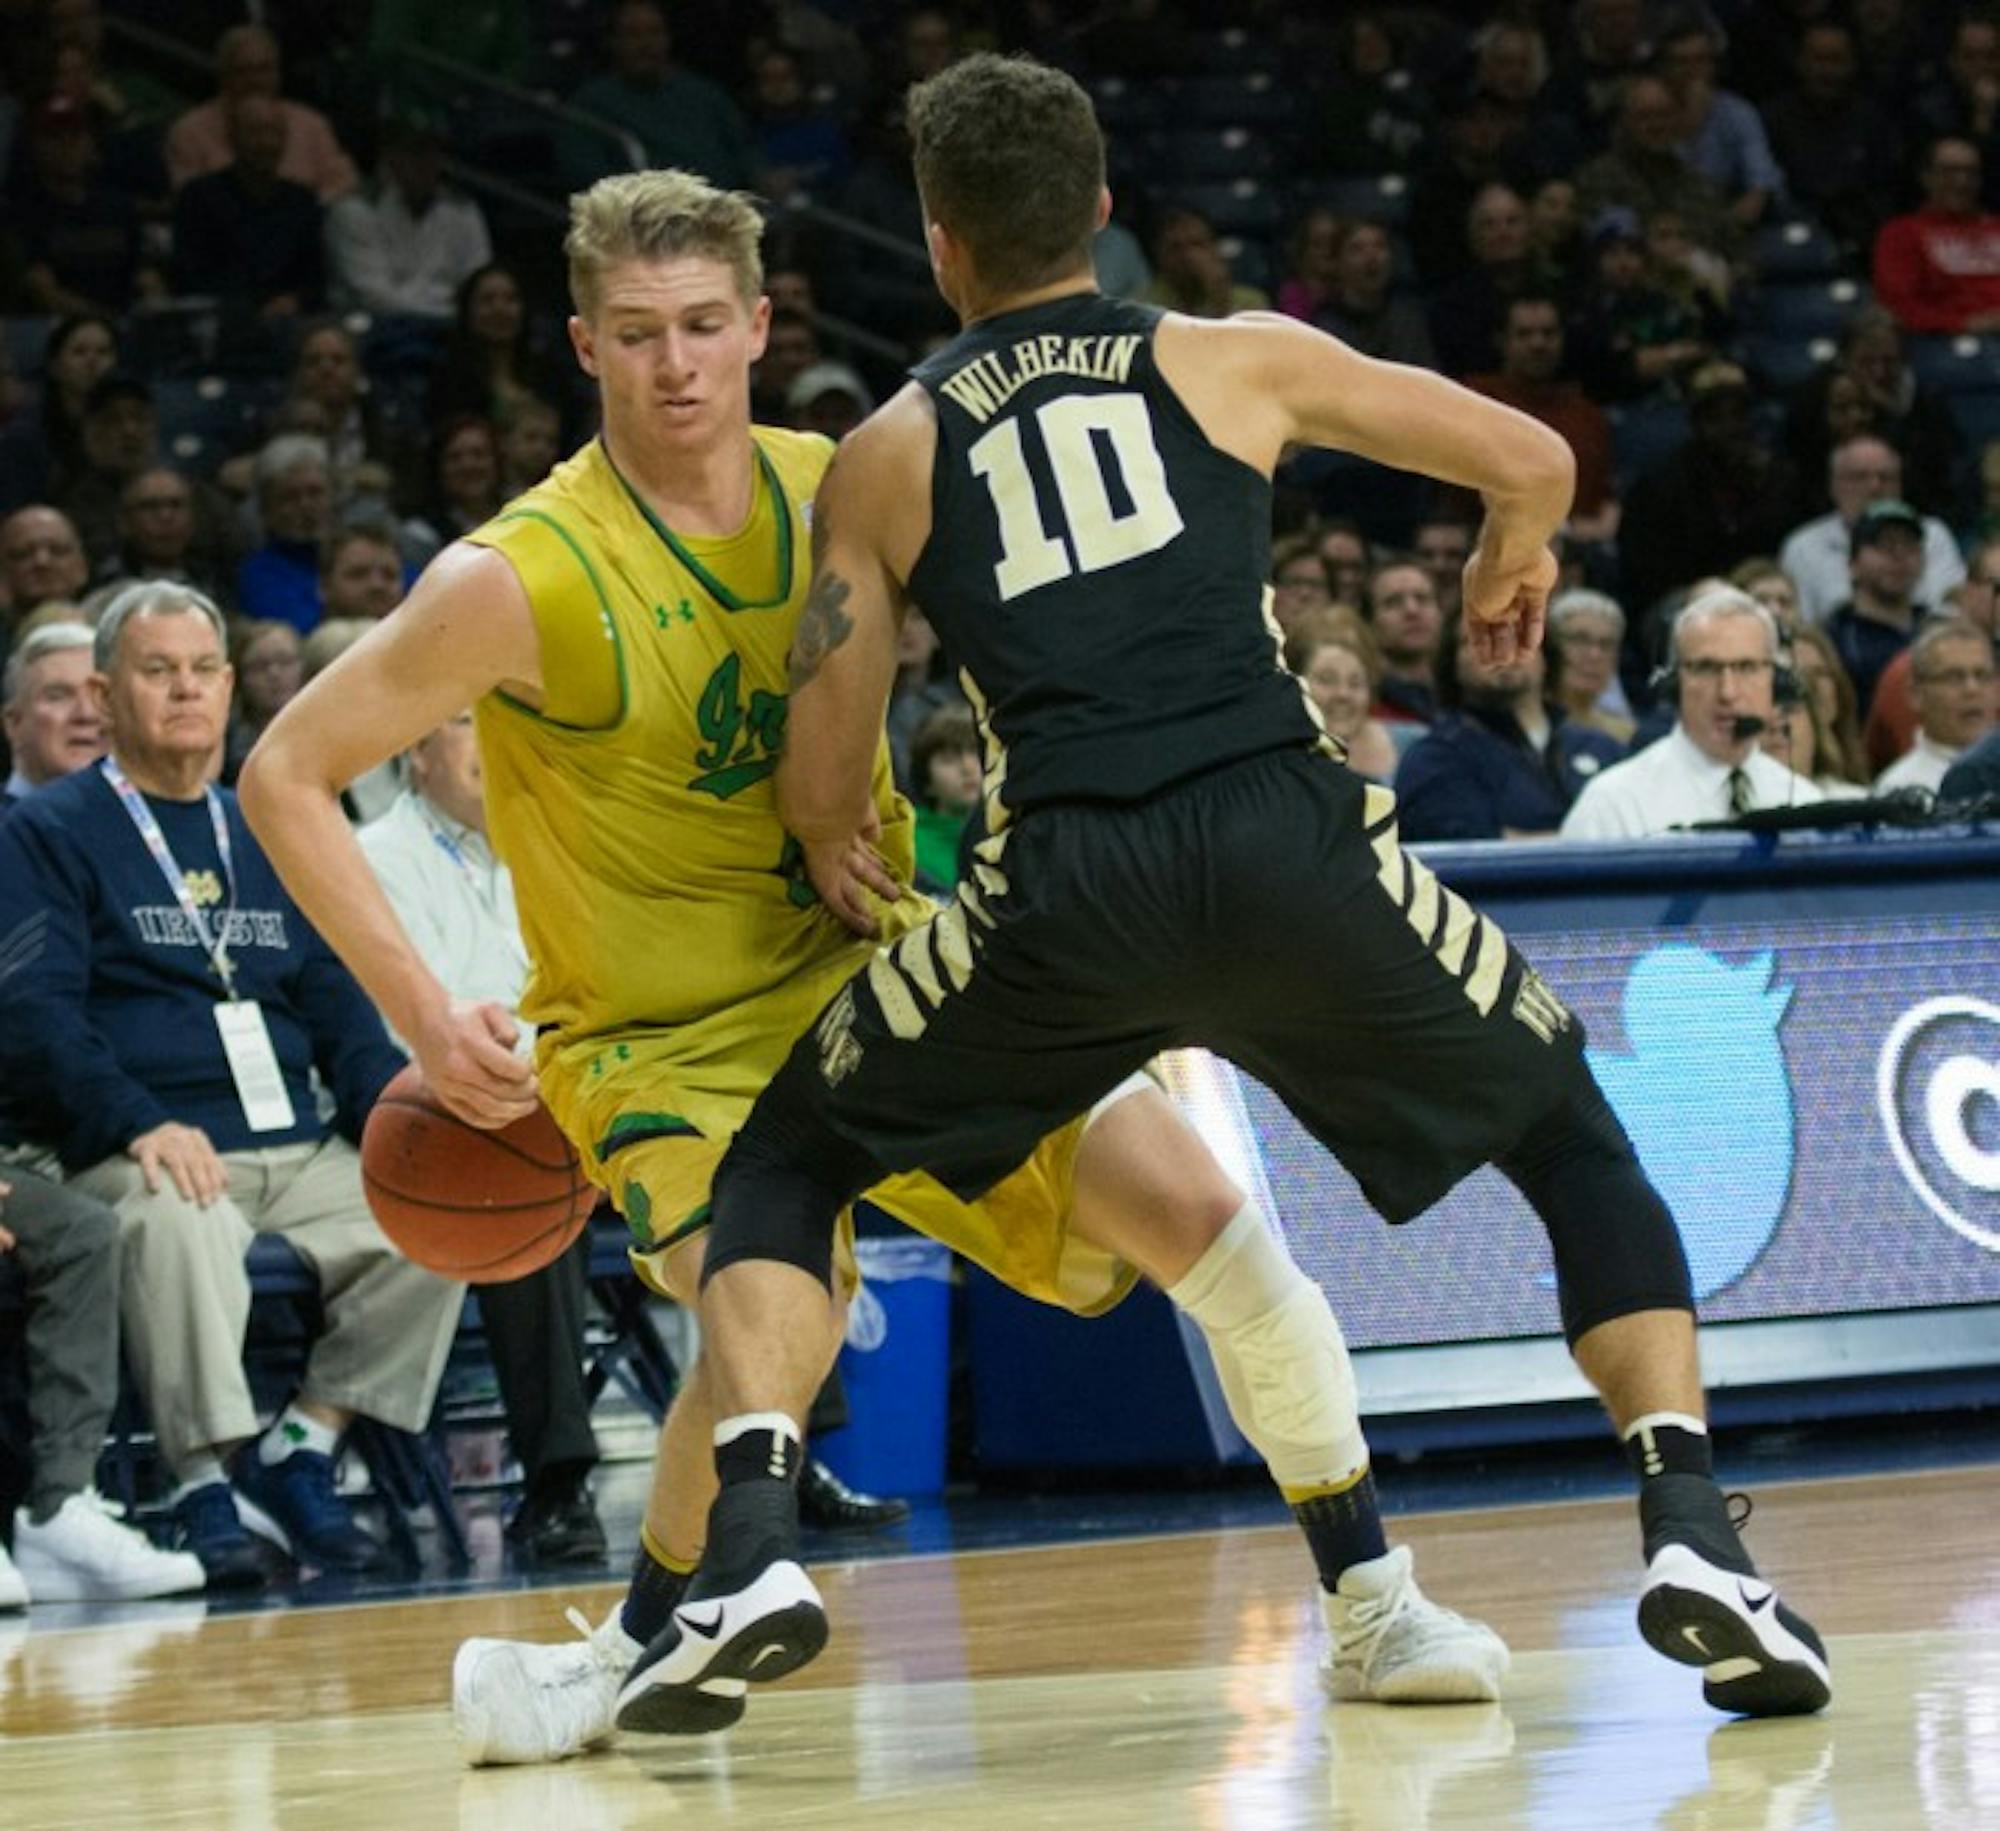 Irish sophomore guard Rex Pflueger looks to drive past a Demon Deacon defender during Notre Dame’s 88-81 win over Wake Forest on Tuesday at Purcell Pavilion.